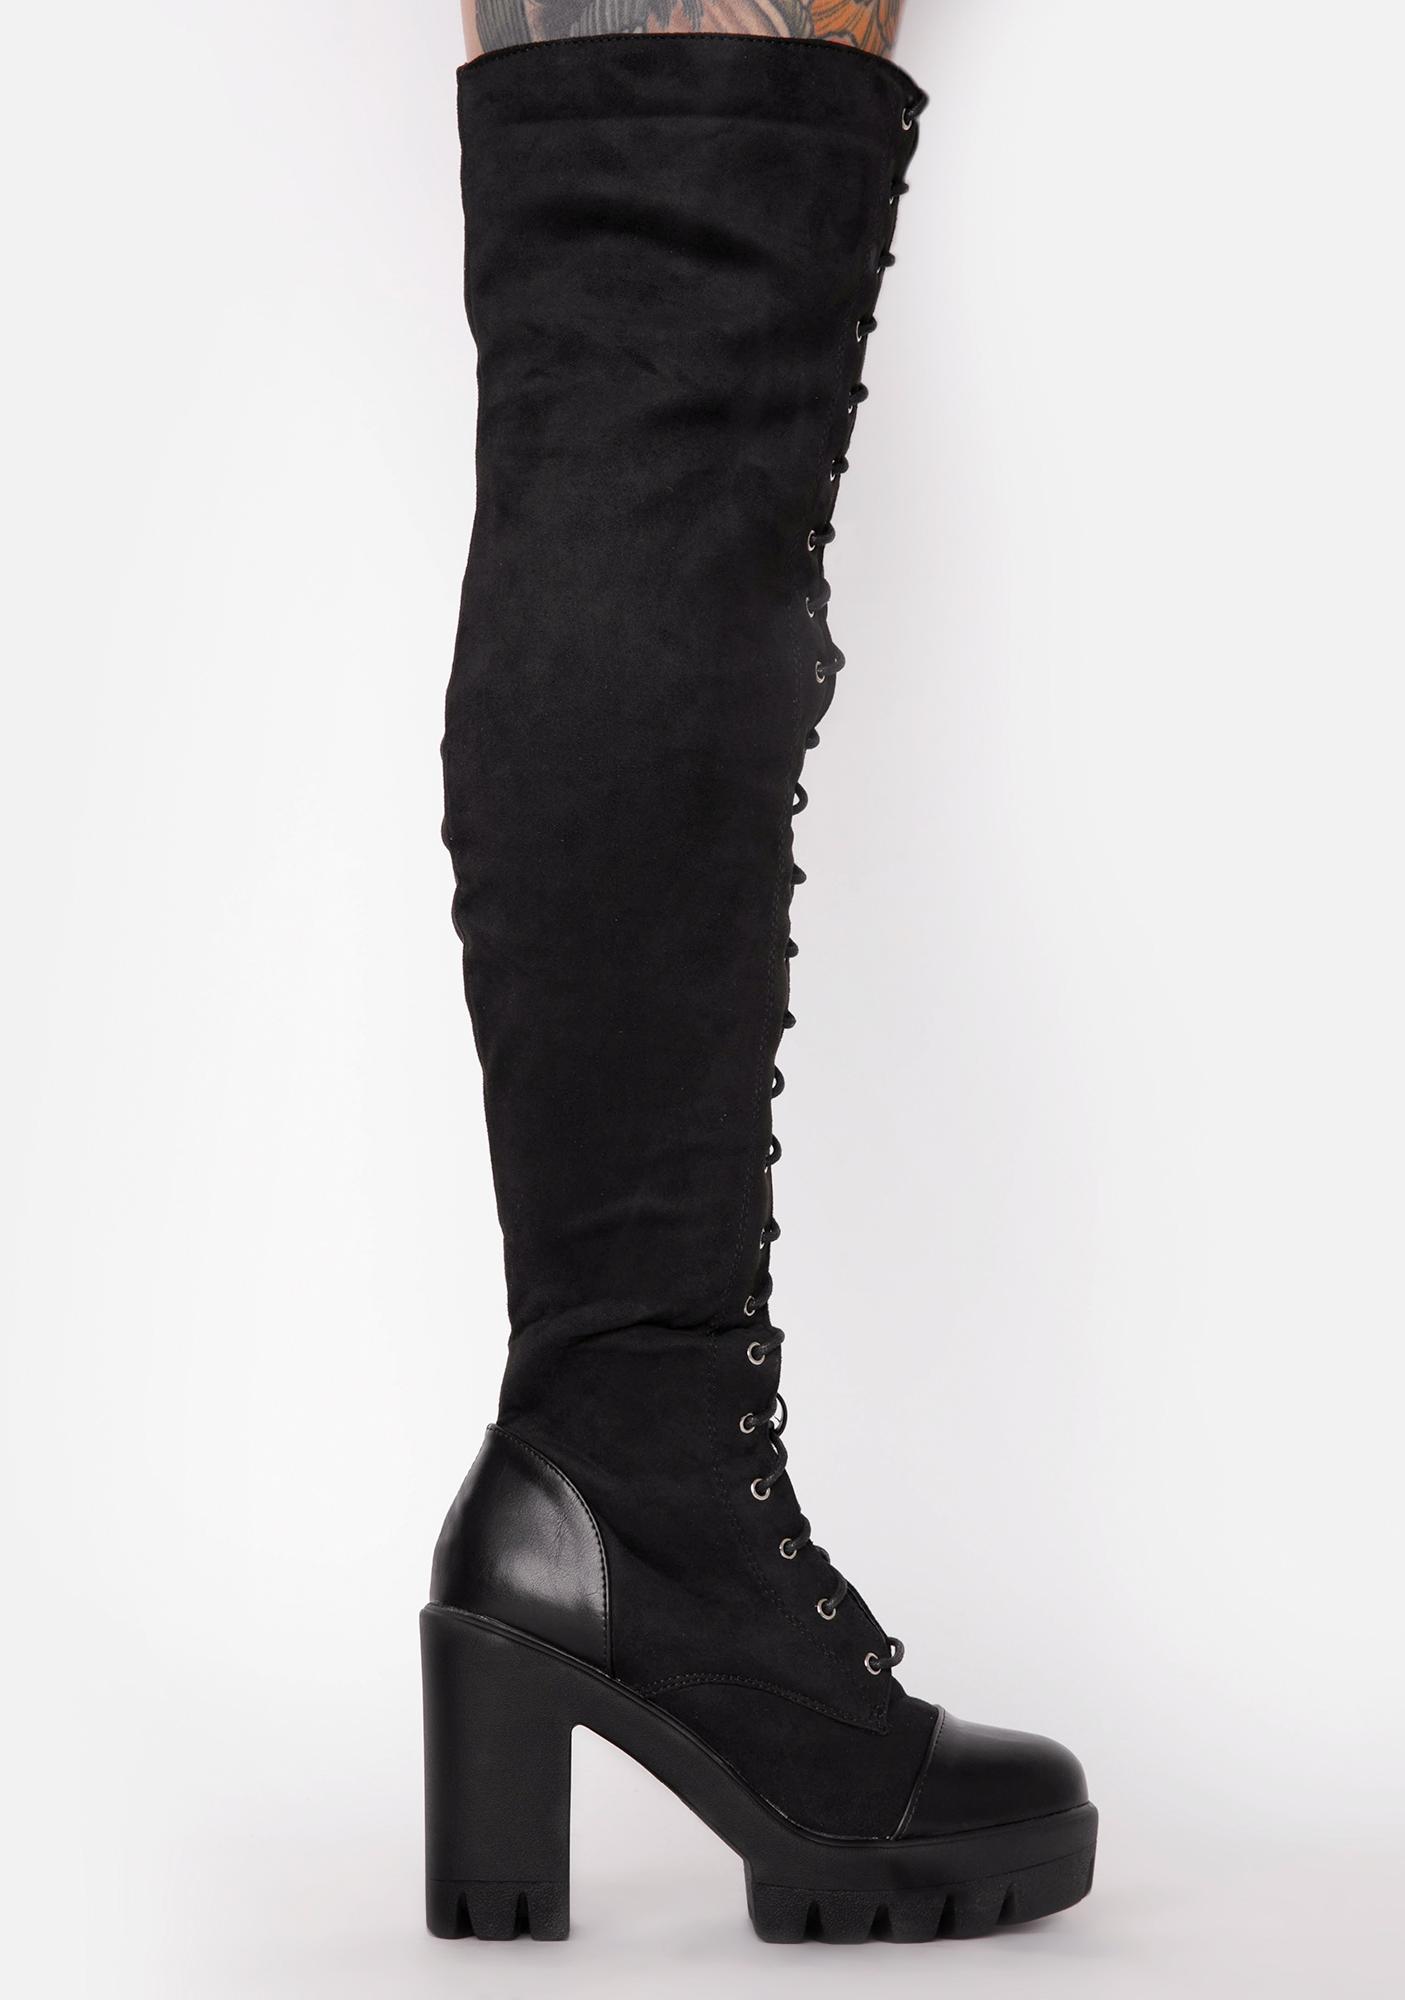 Faux Suede Lace Up Knee High Heeled Boots Black | Dolls Kill